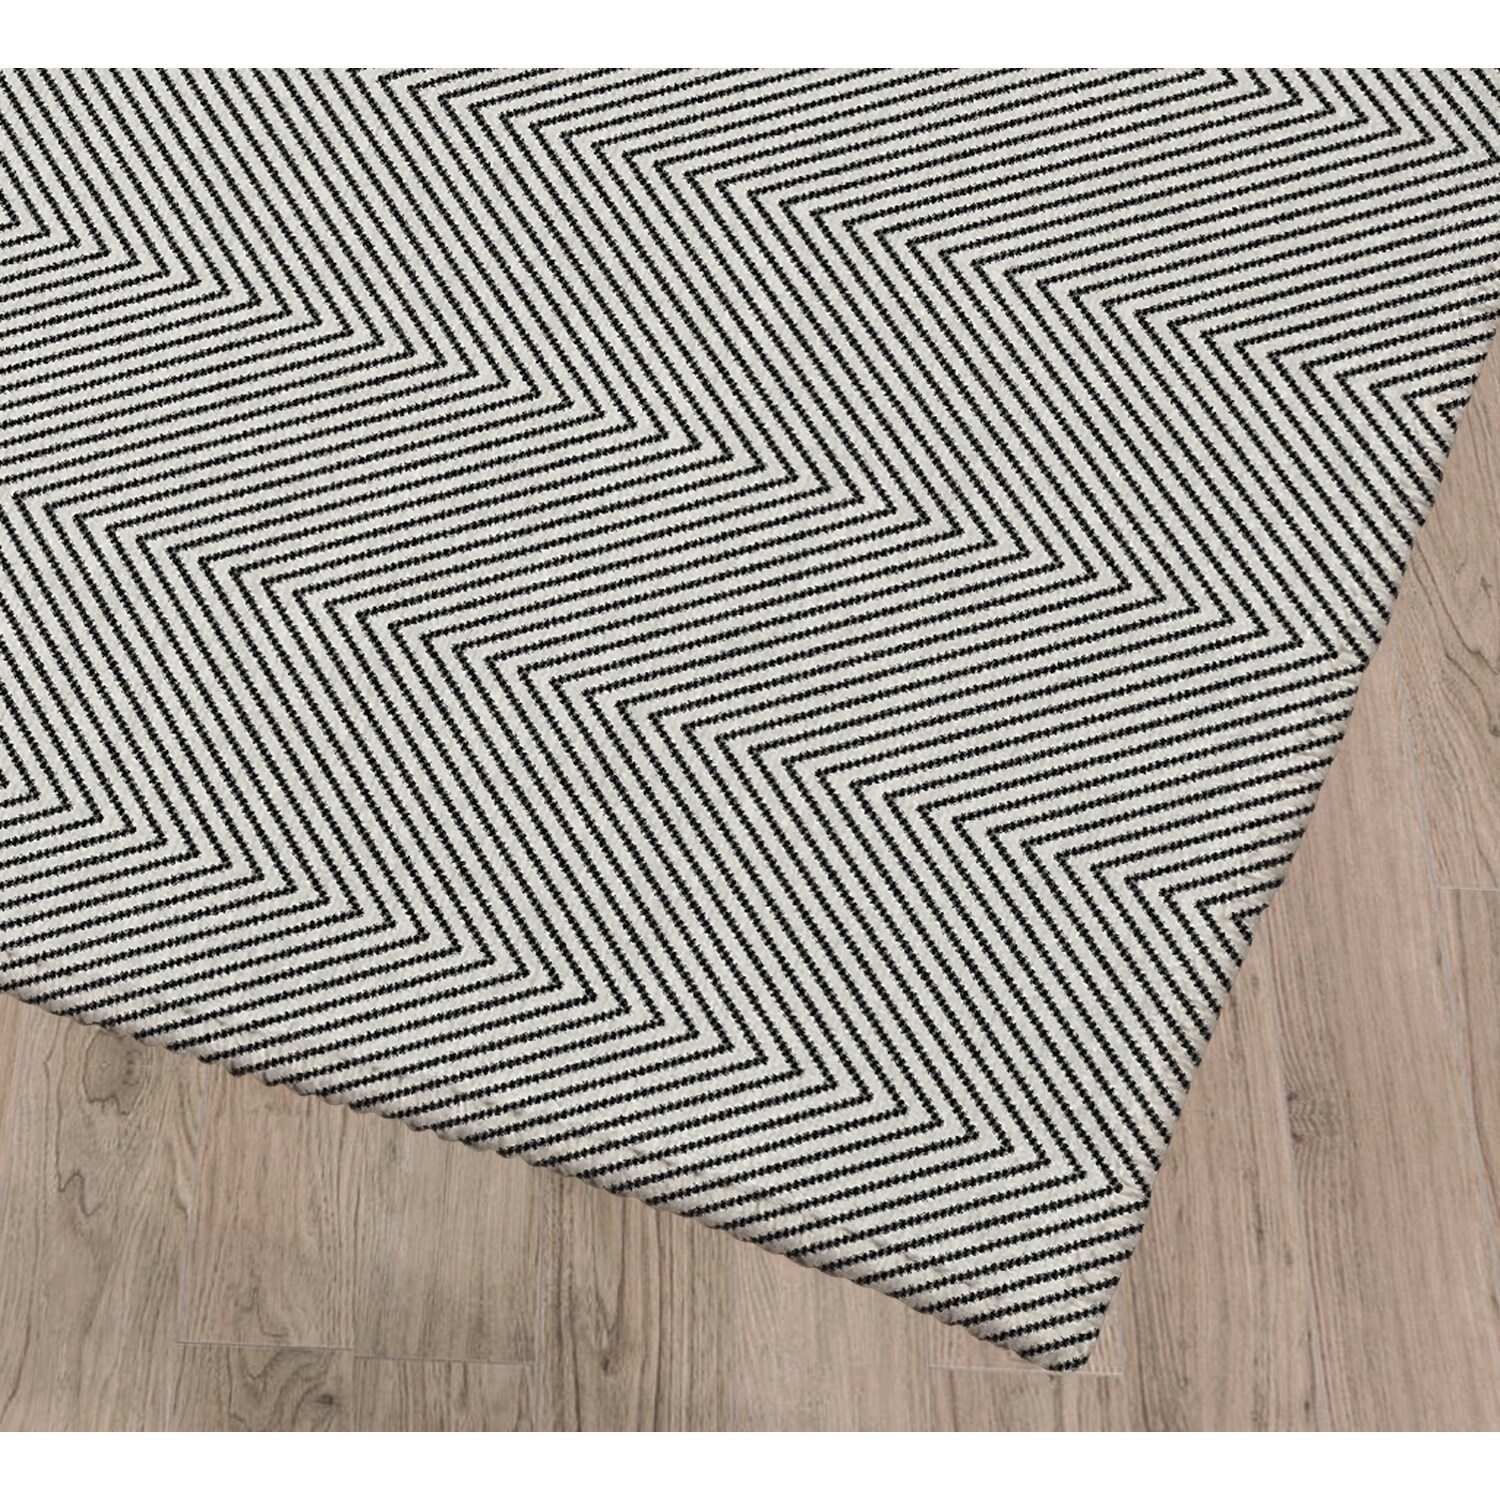 STITCHED ZIG ZAG TRIBAL BW Indoor Floor Mat By Kavka Designs - Bed